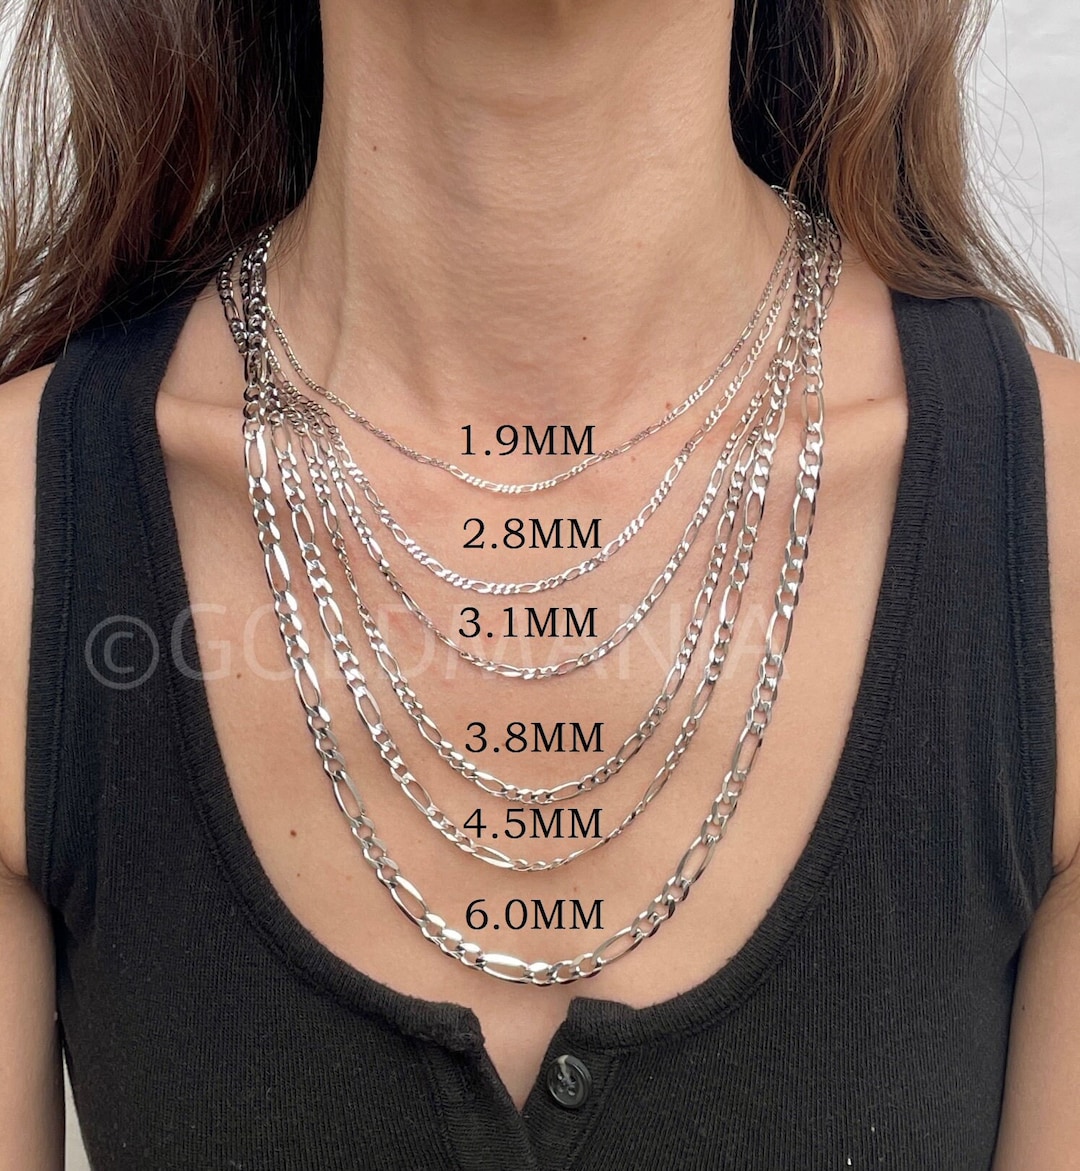 2MM Stainless steel chain necklace, Thin cable chain necklace for women  men, Silver chains for necklace alone or pendant addition, 16-30 inch  Available (16 inch)